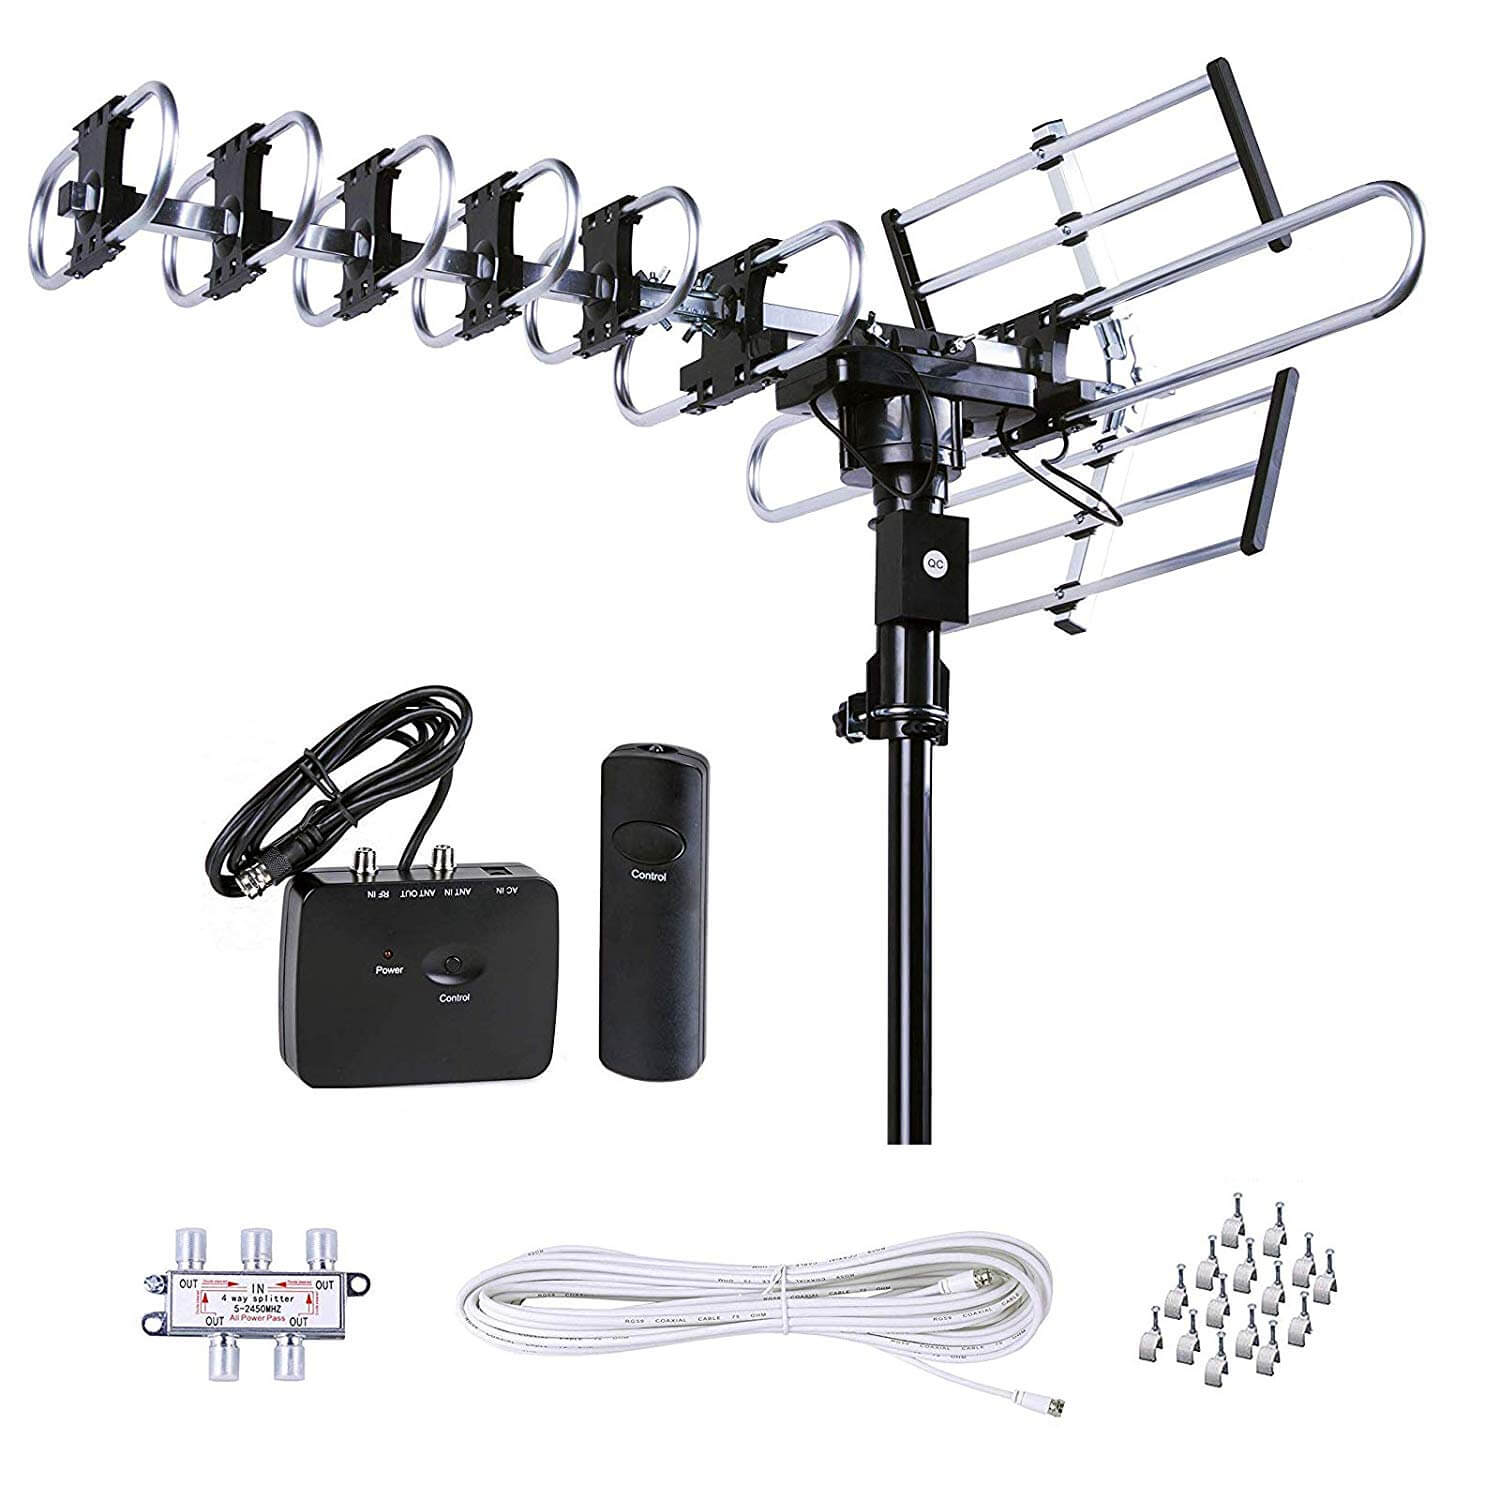 TV Antenna 40ft Coax Cable Mesqool Amplified Outdoor Digital HDTV Antenna 150 Mile Range Motorized 360 Degree Rotation Wireless Remote Control for 2 TVs Support UHF/VHF 4K 1080P Channels Reception 